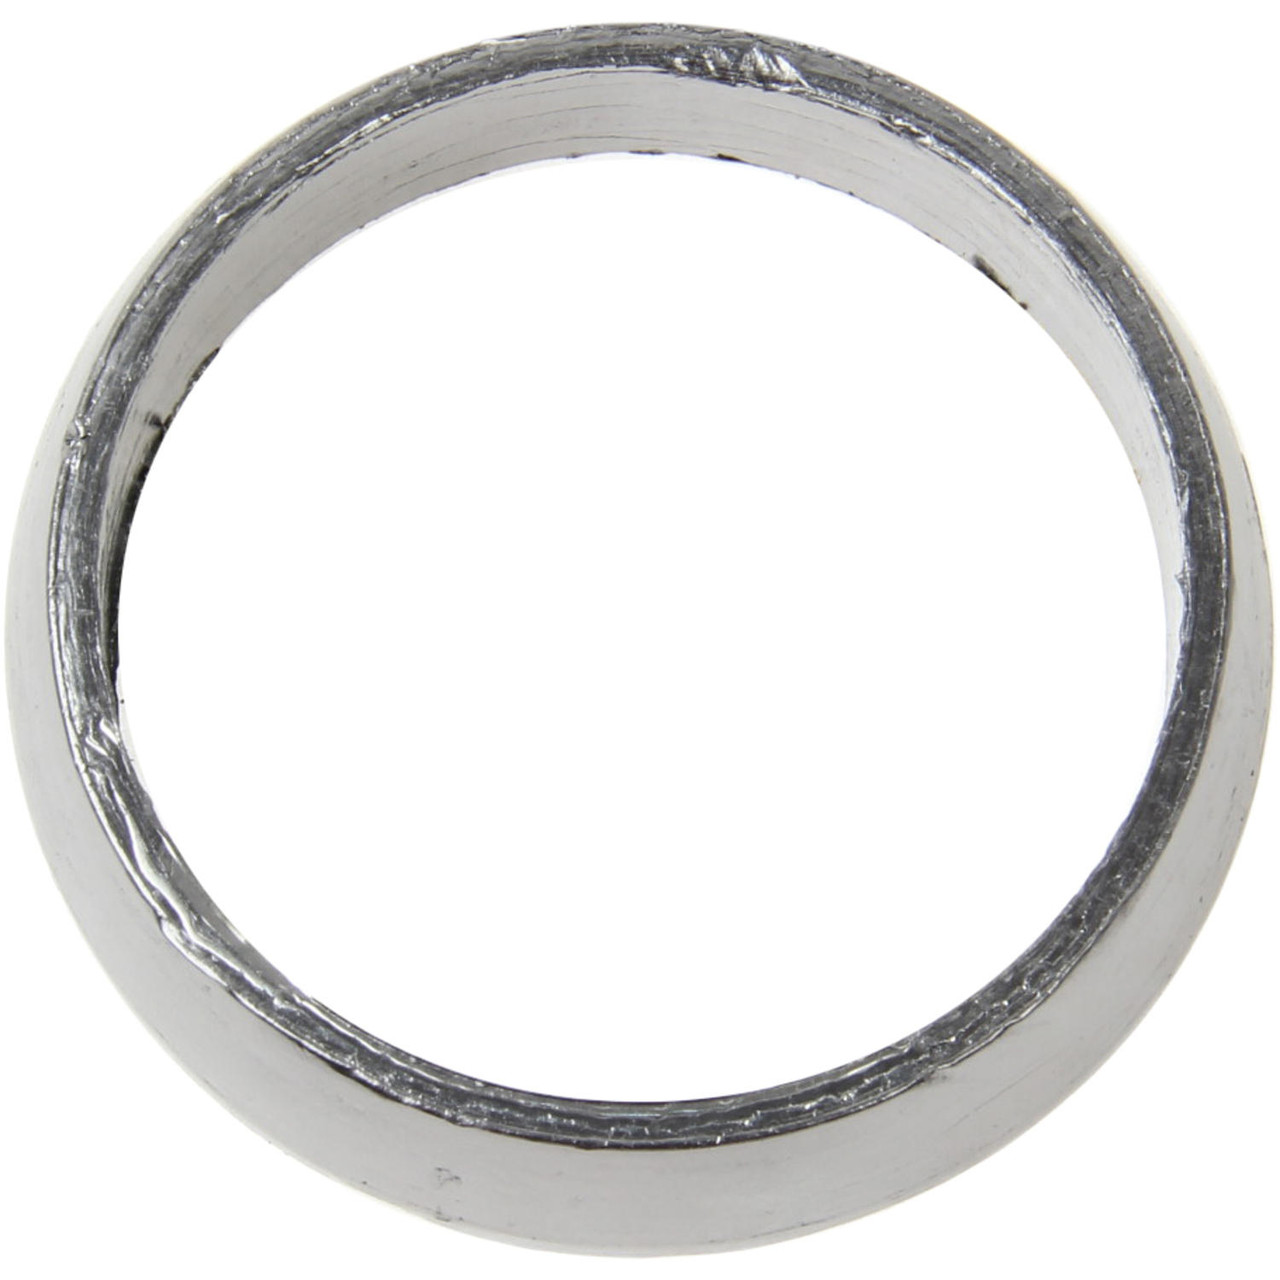 BMW Exhaust Seal Ring - Genuine BMW 11627830668